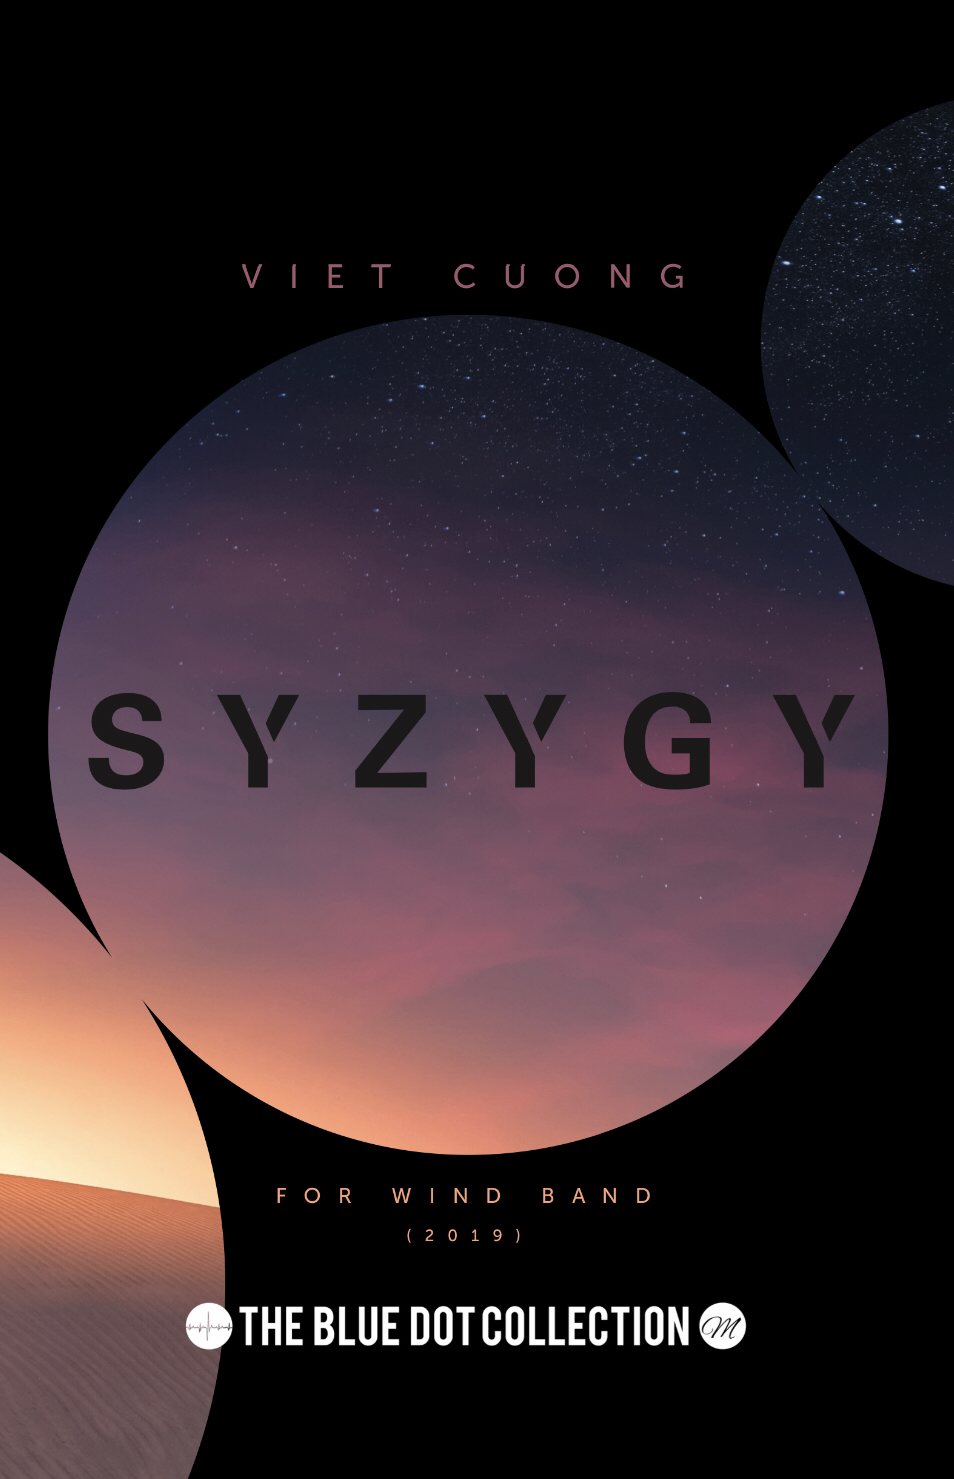 Syzygy by Viet Cuong